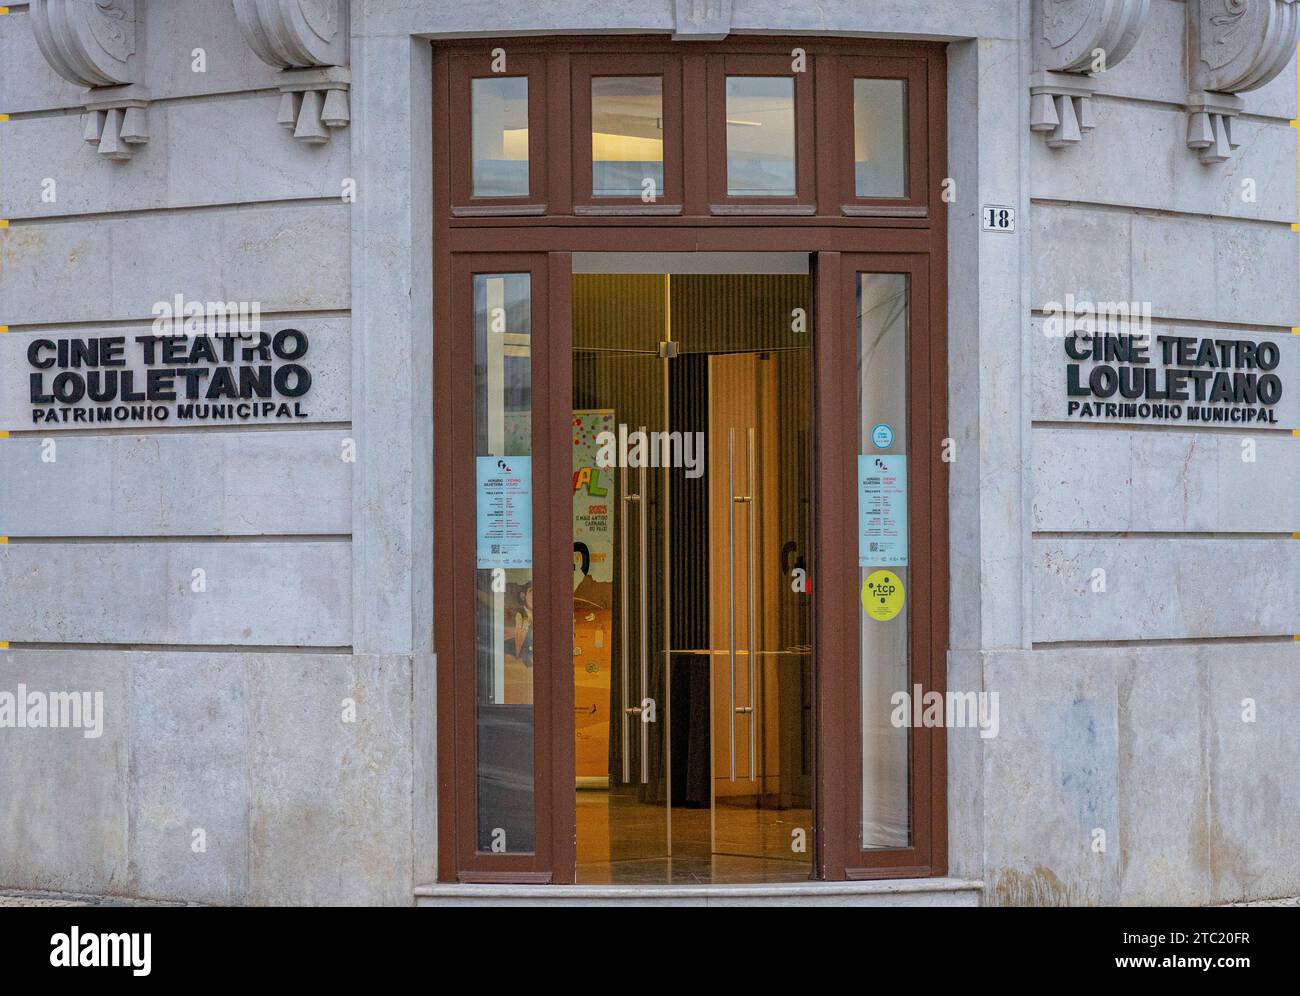 front facade of the entrance to the cine Teatro Louletano world heritage site, Loulé in the Algarve region Stock Photo